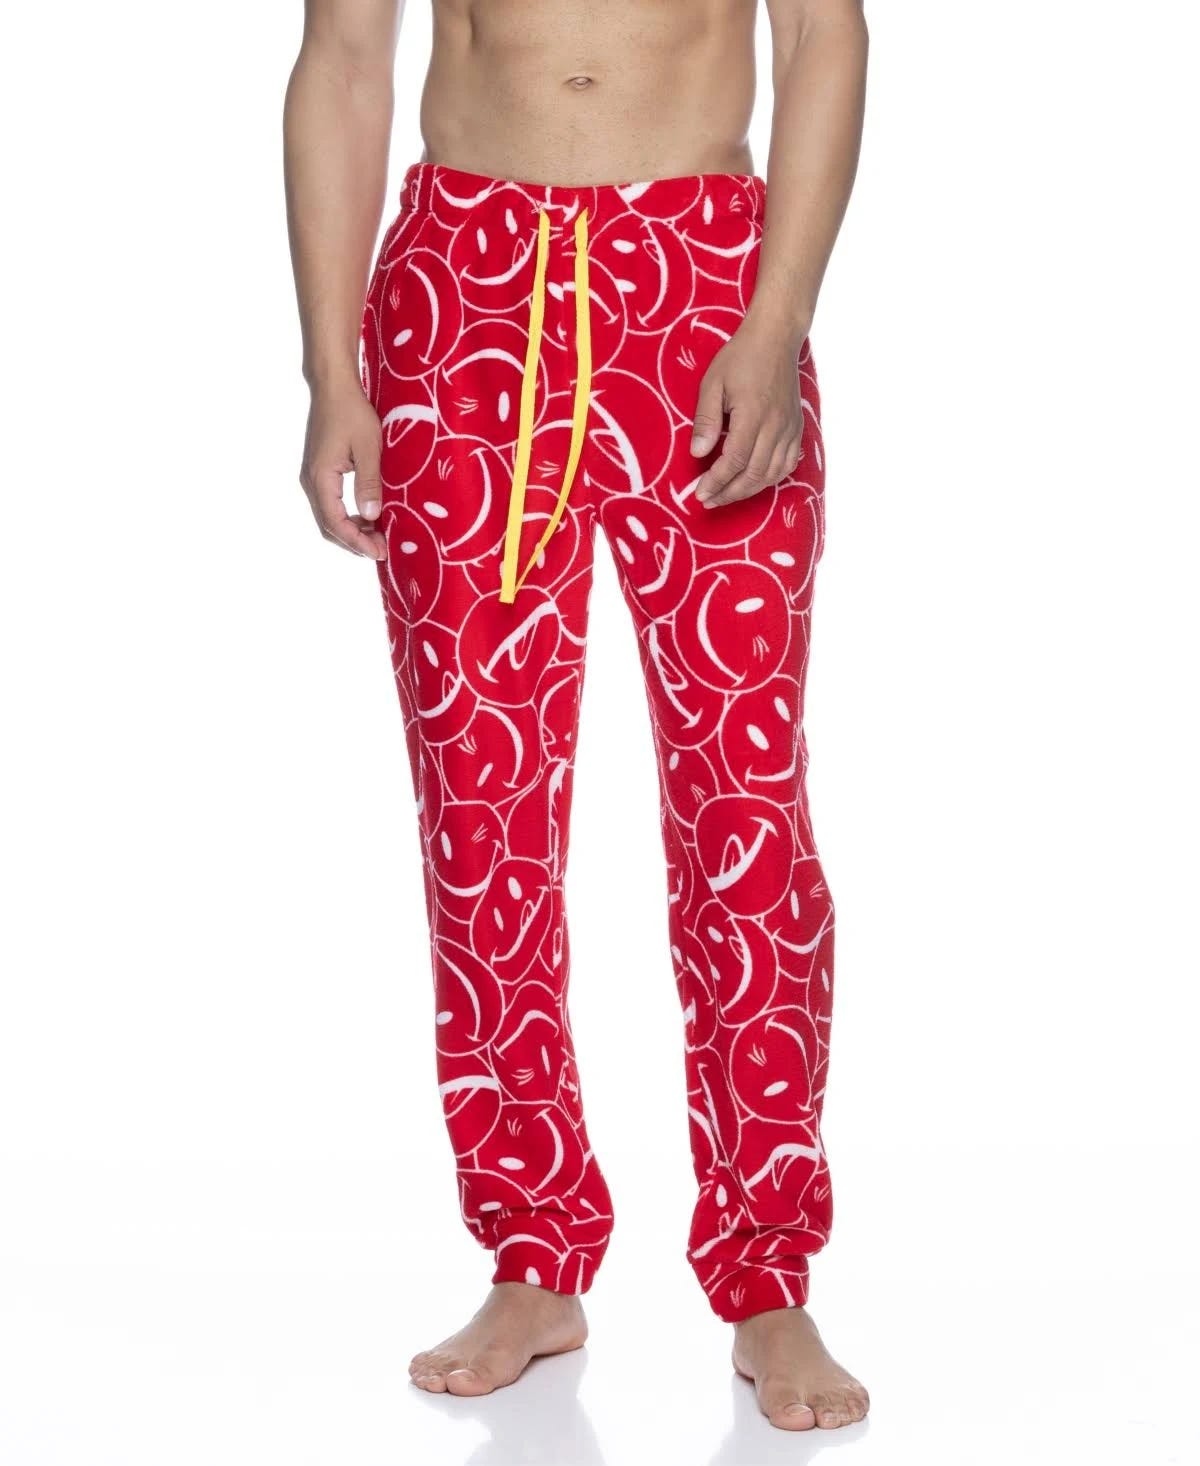 Cozy Red Plush Jogger Pants with Adjustable Drawstring | Image